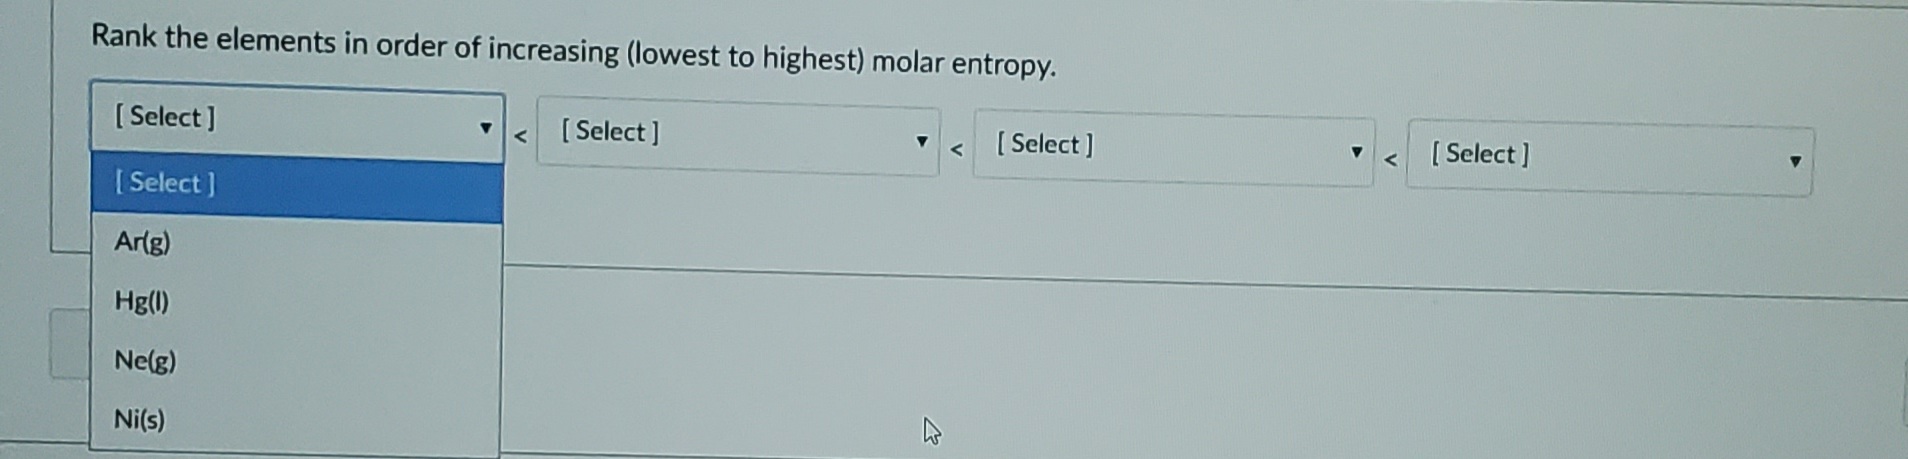 Rank the elements in order of increasing (lowest to highest) molar entropy.
[ Select ]
<[Select]
[ Select ]
[ Select ]
[ Select ]
Arlg)
Hg(1)
Ne(g)
Ni(s)
